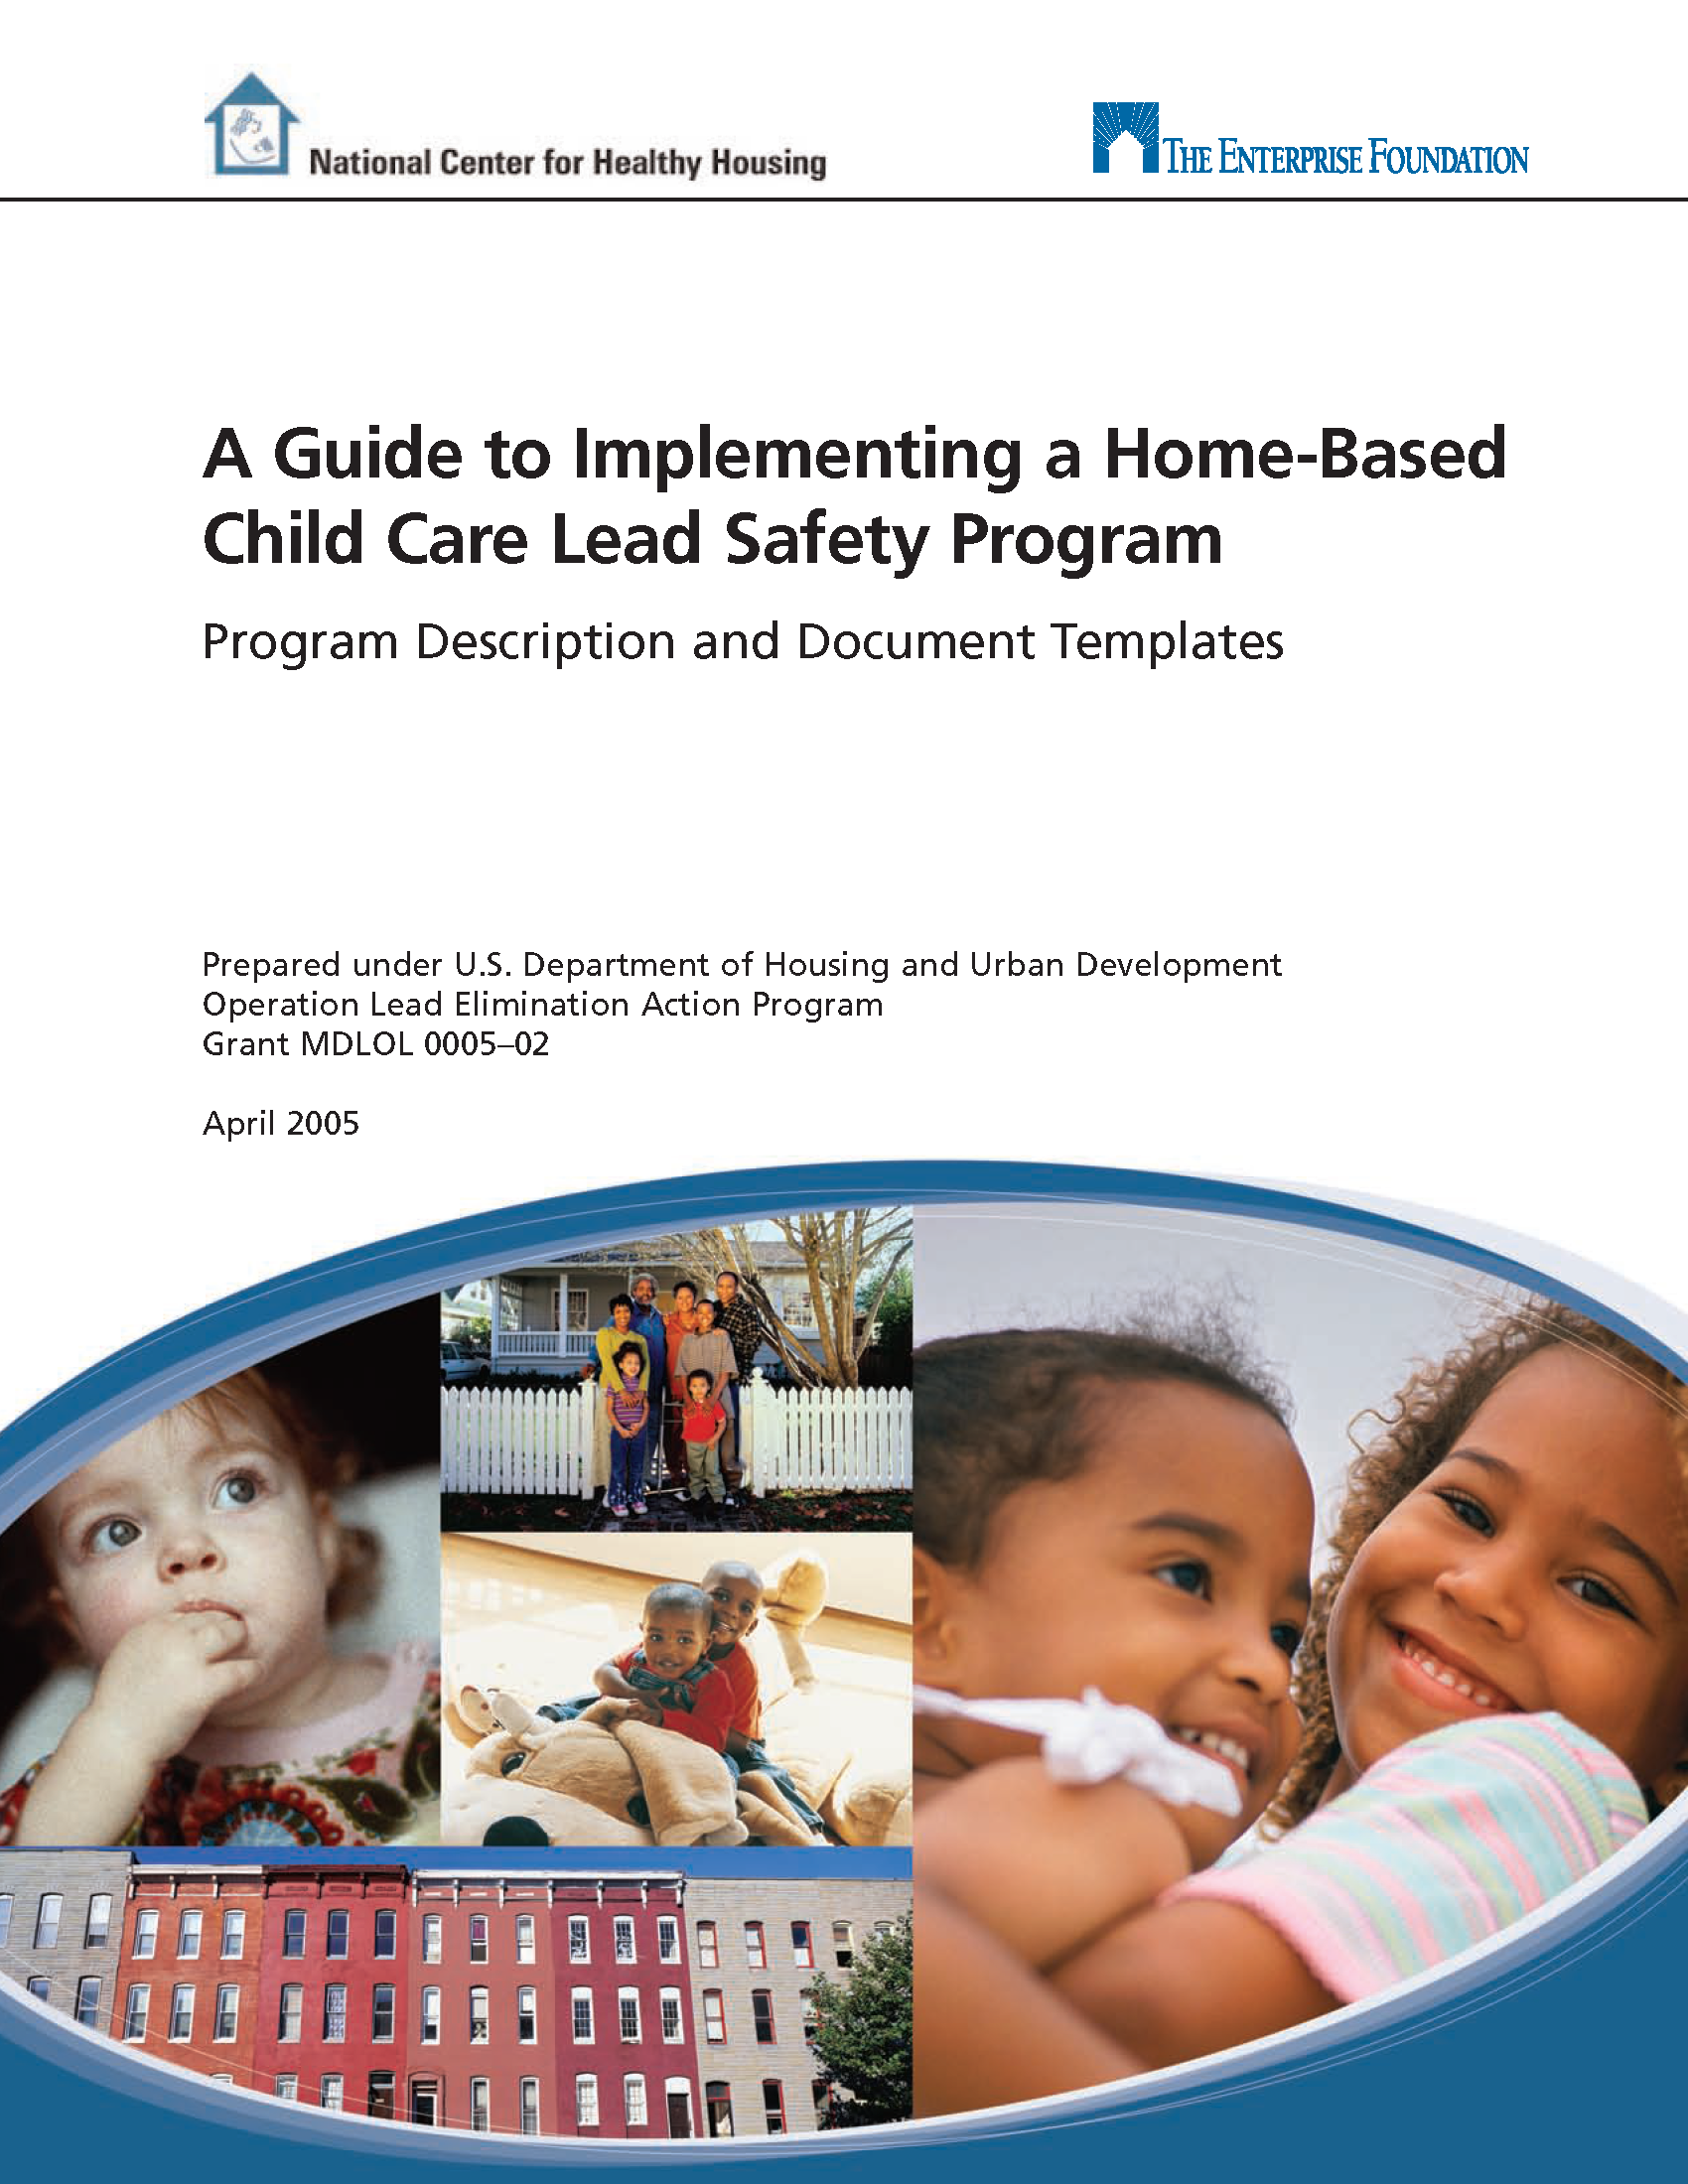 A Guide to Implementing a Home-Based Child Care Lead Safety Program